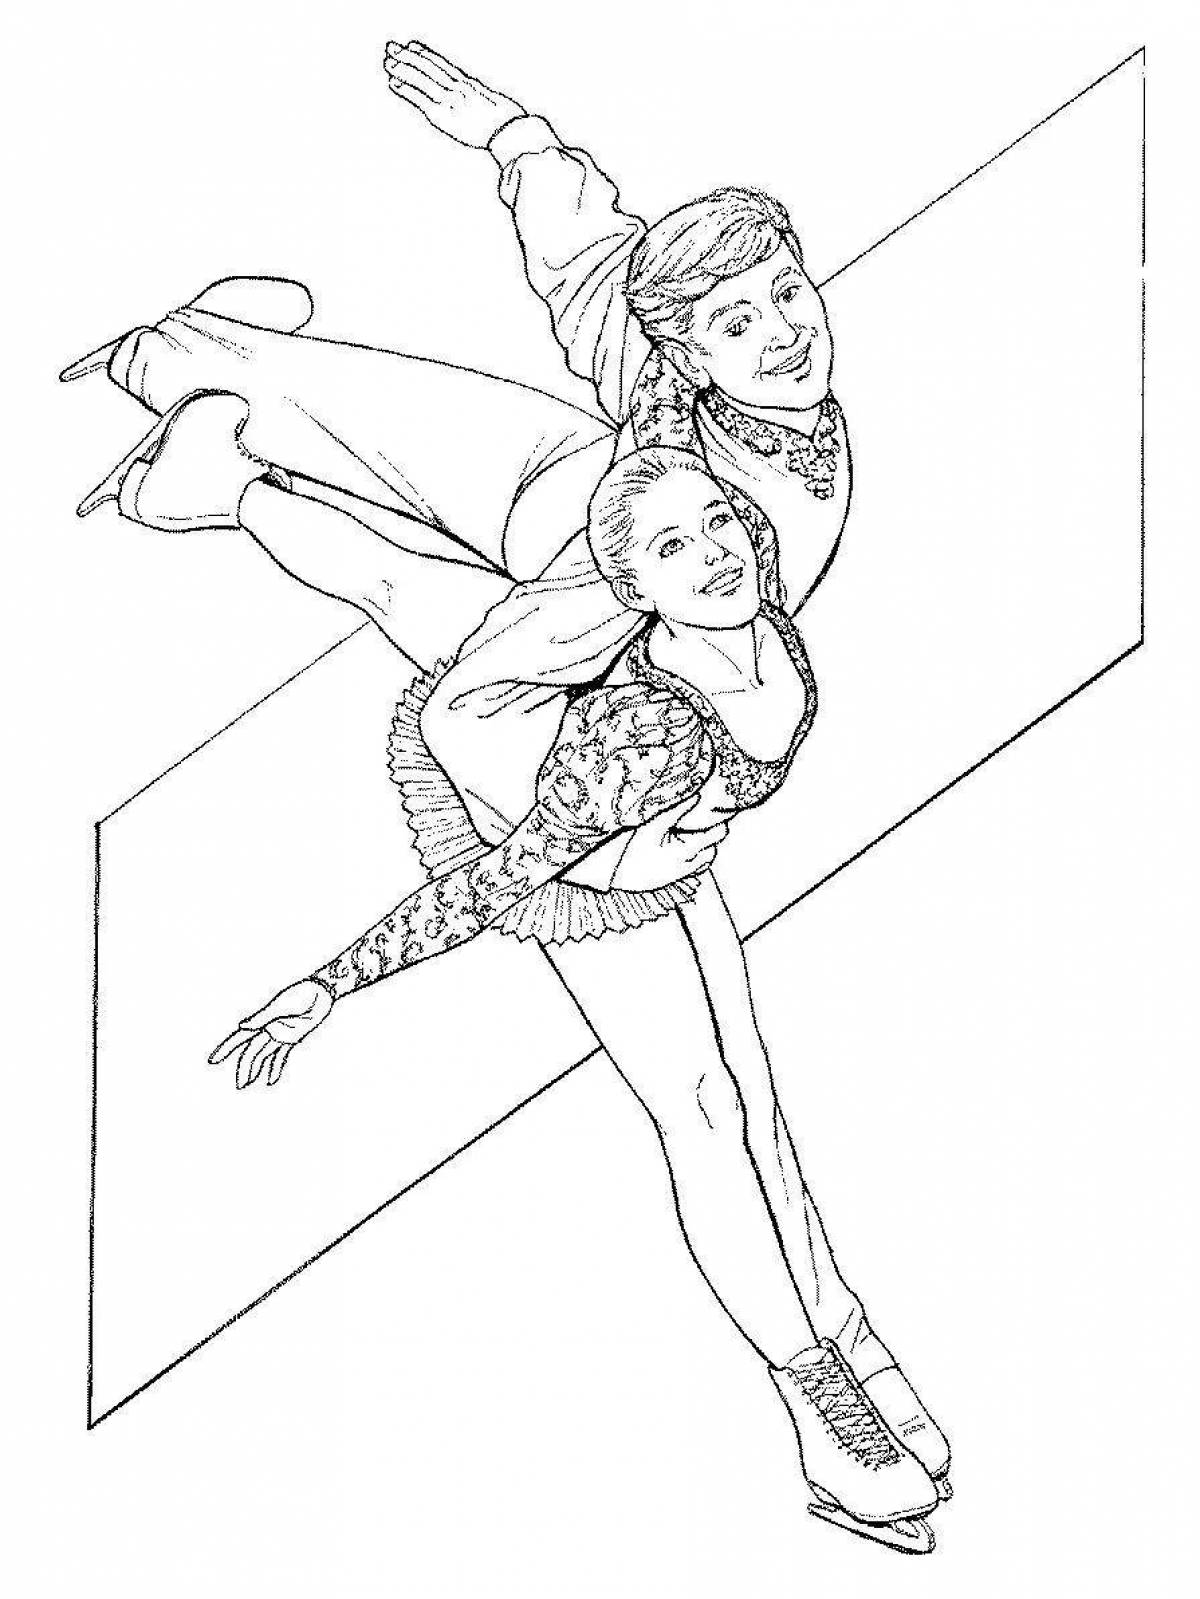 Amazing figure skater coloring page for kids